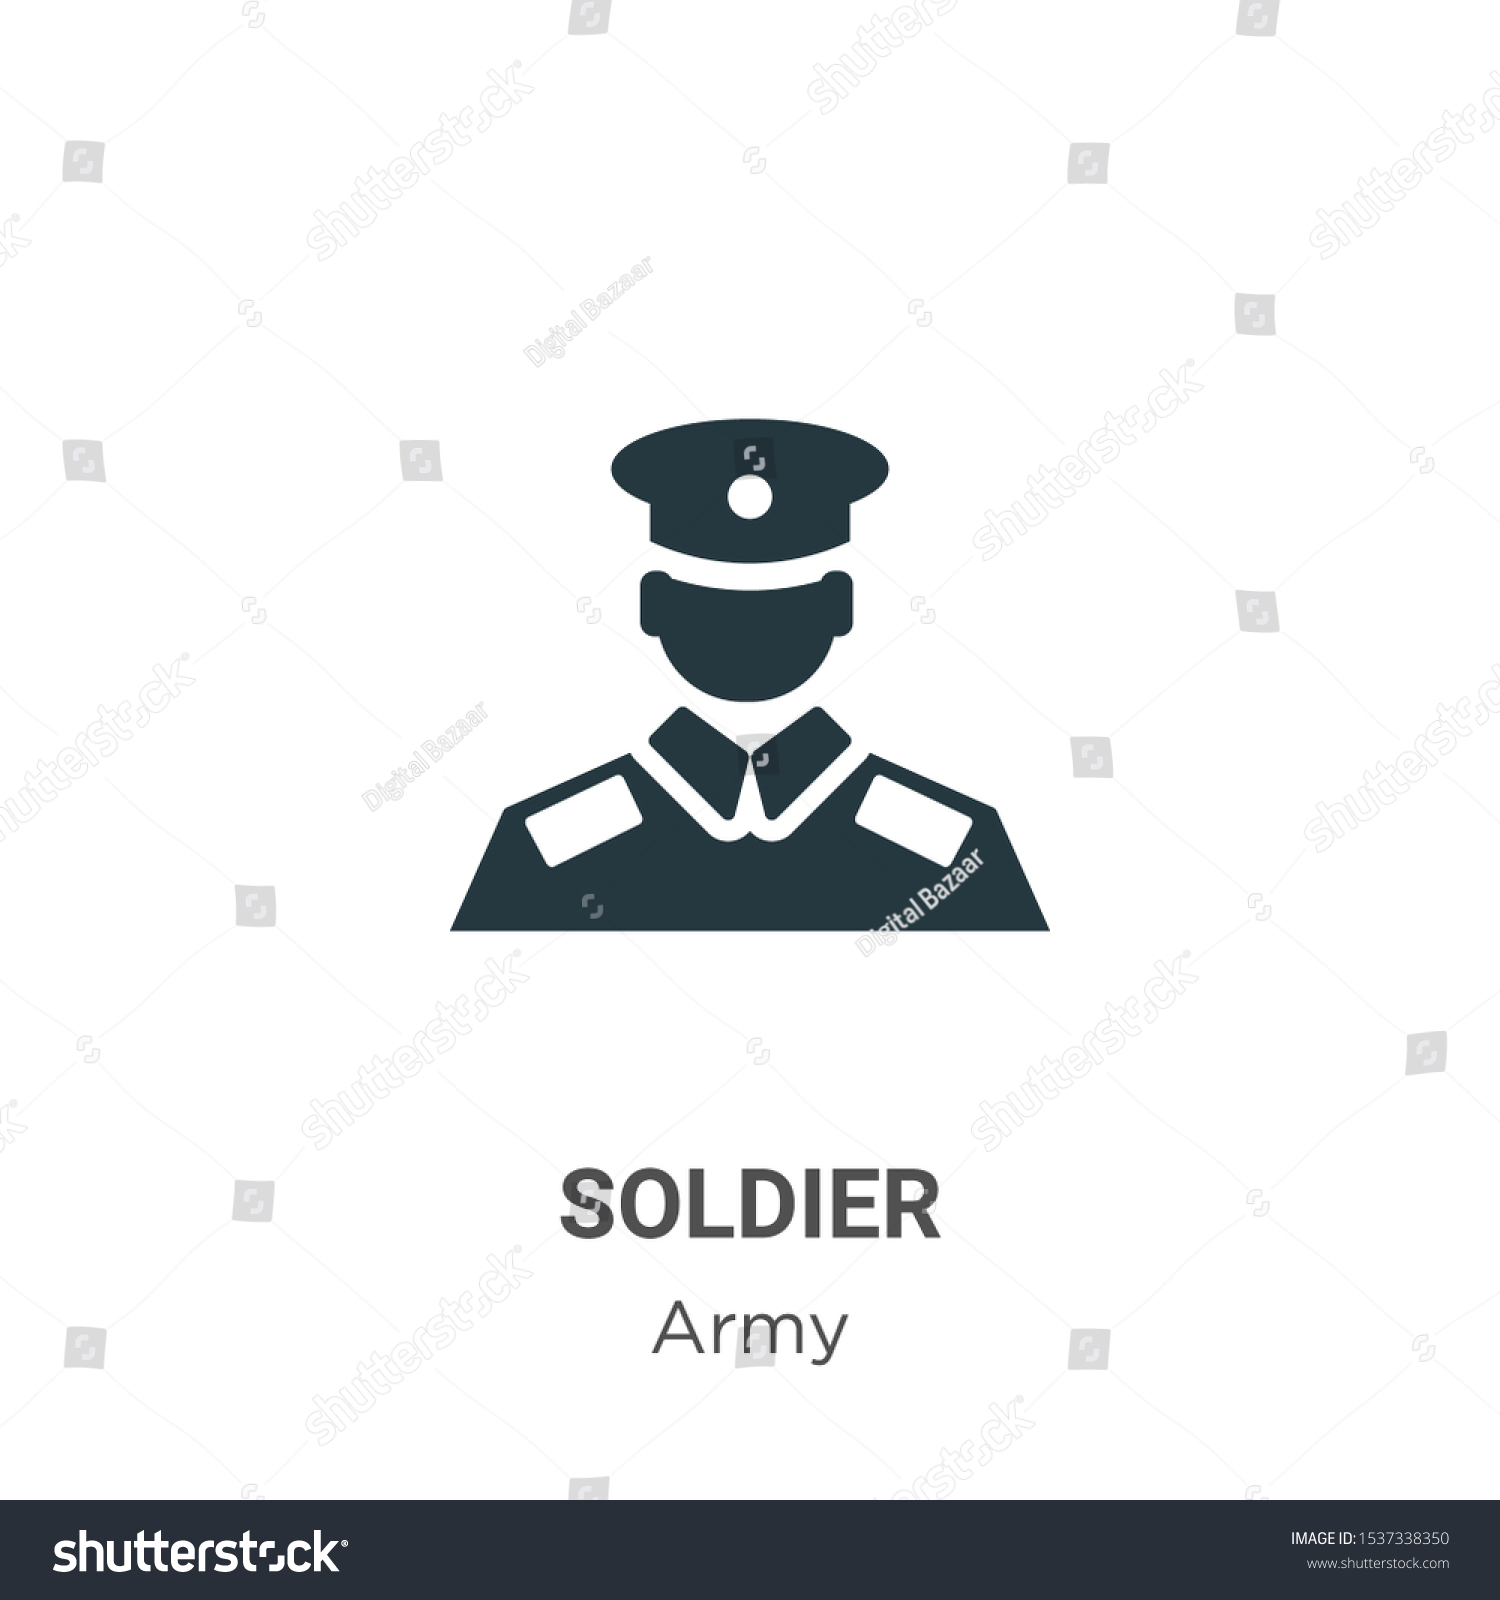 Soldier Vector Icon On White Background Stock Vector (Royalty Free ...